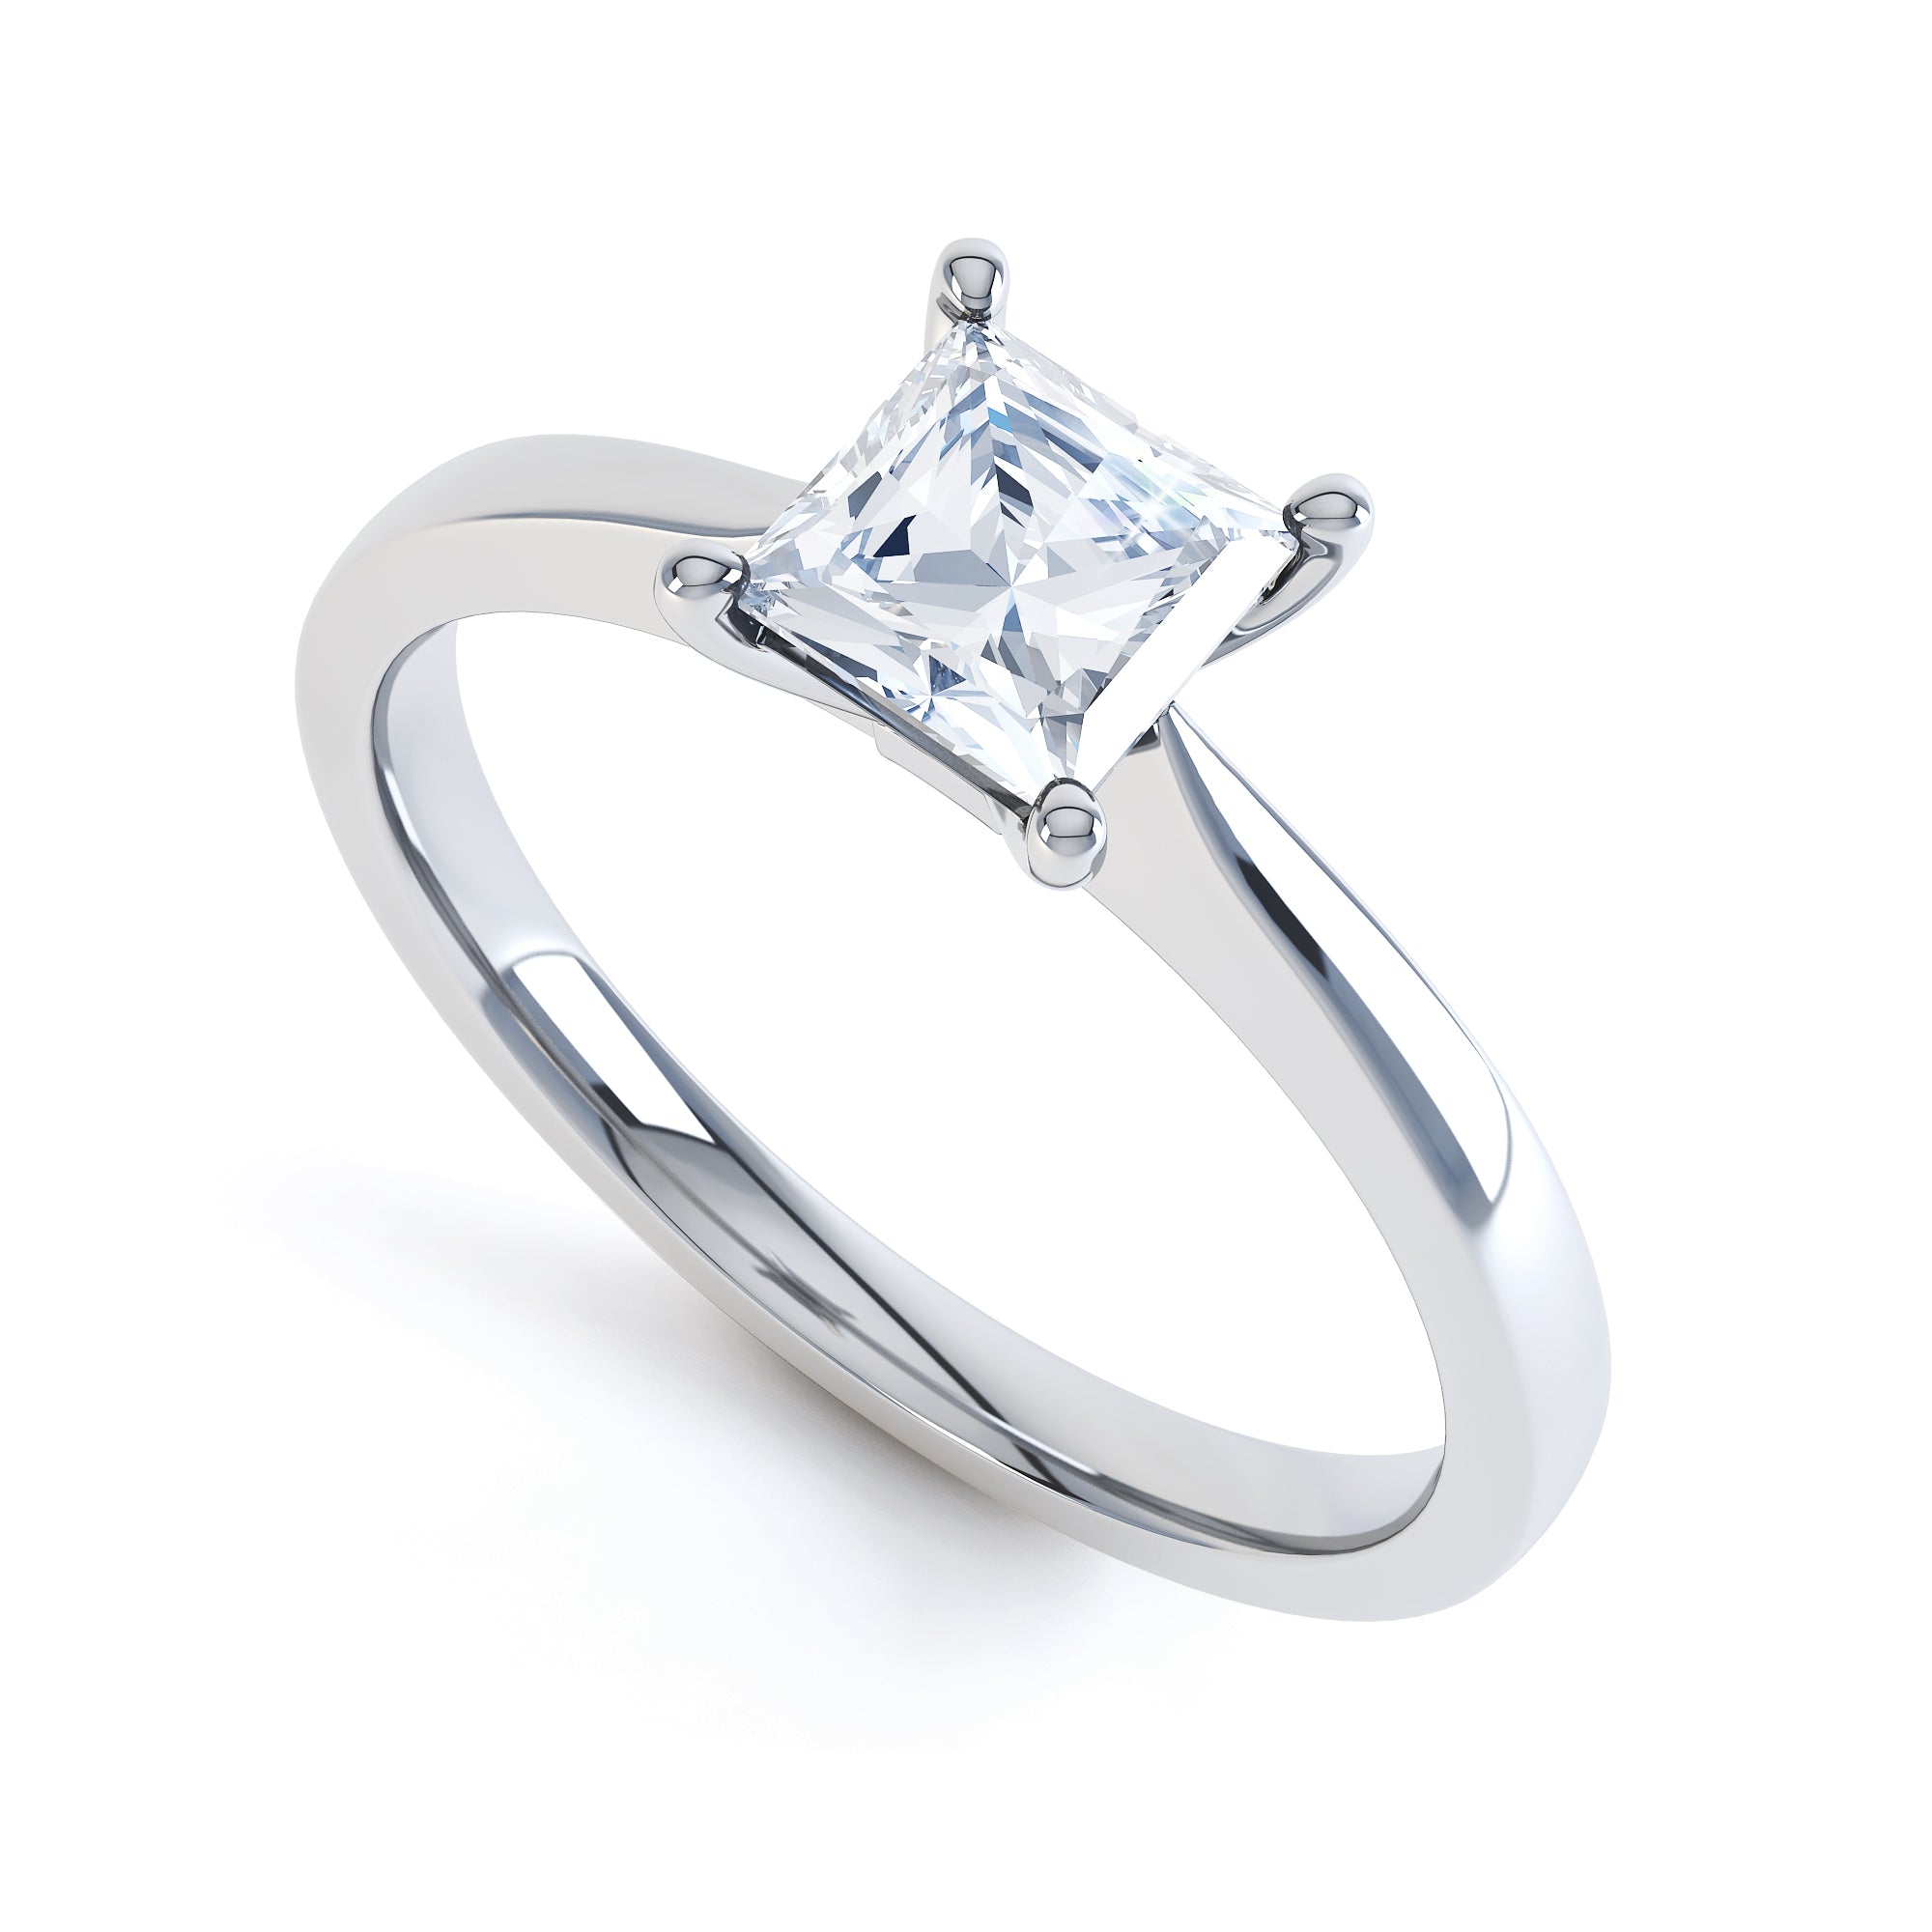 Princess Cut Centre Stone, 4 Claw, Knife Edge Shoulders, Diamond Engagement Ring